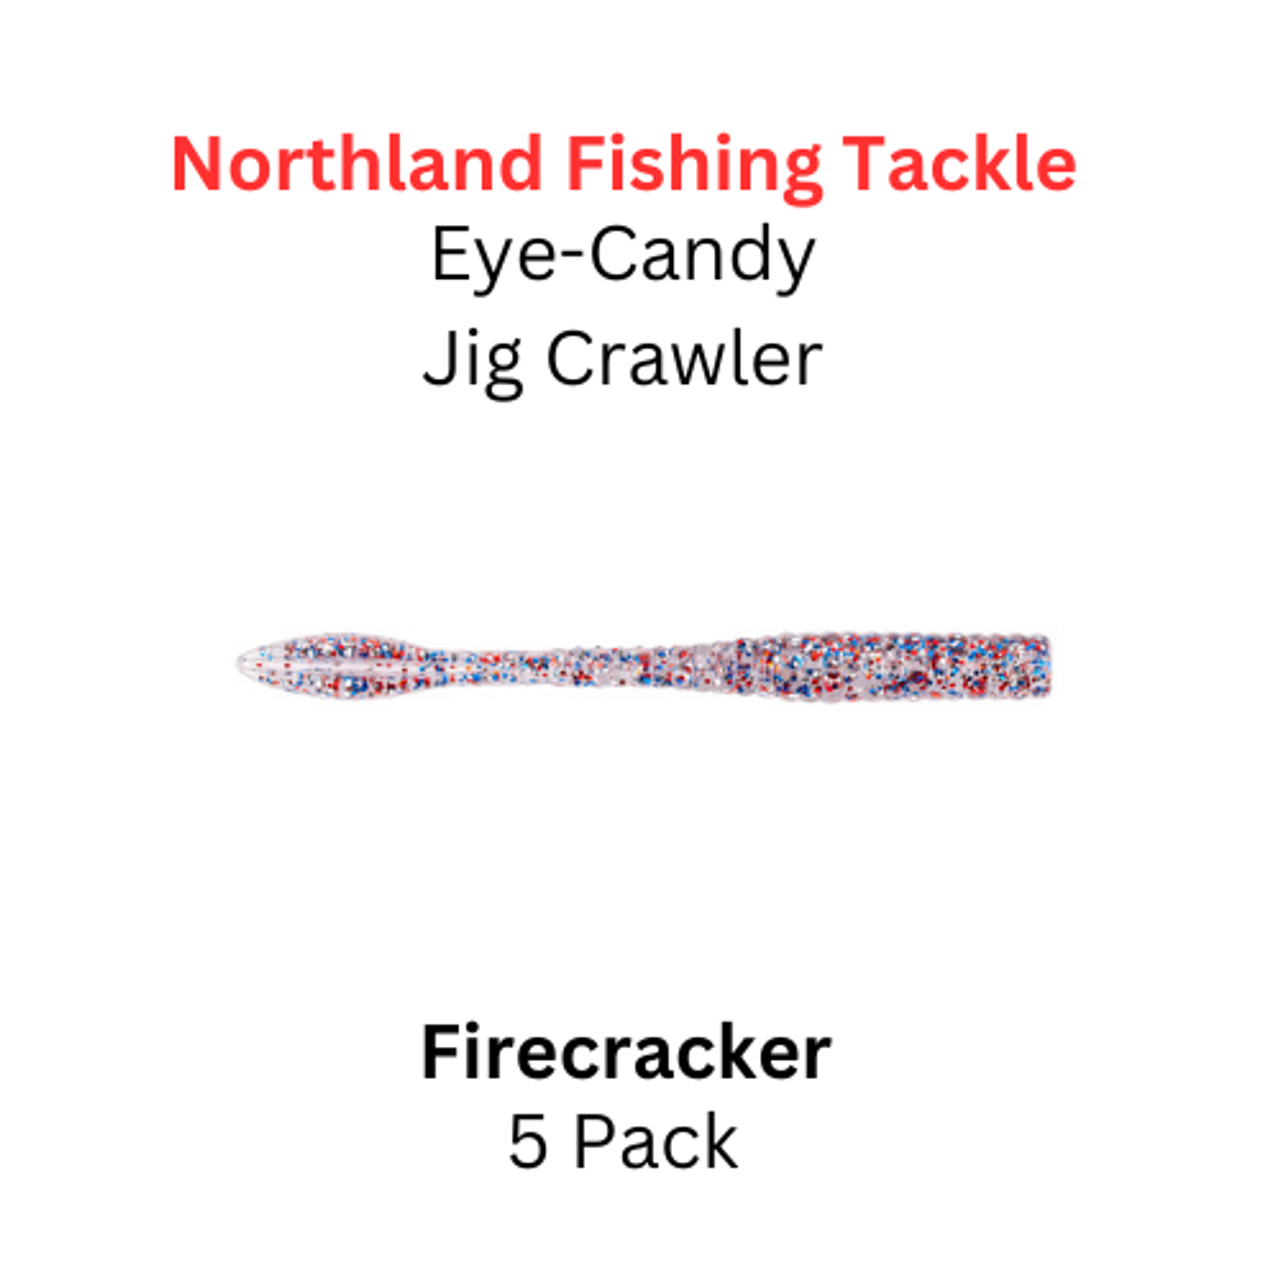 https://cdn11.bigcommerce.com/s-u9nbd/images/stencil/1280x1280/products/6638/16807/Northland_Fishing_Tackle_Eye_Candy_Jig_Crawler_Firecracker__38573.1688746947.png?c=2